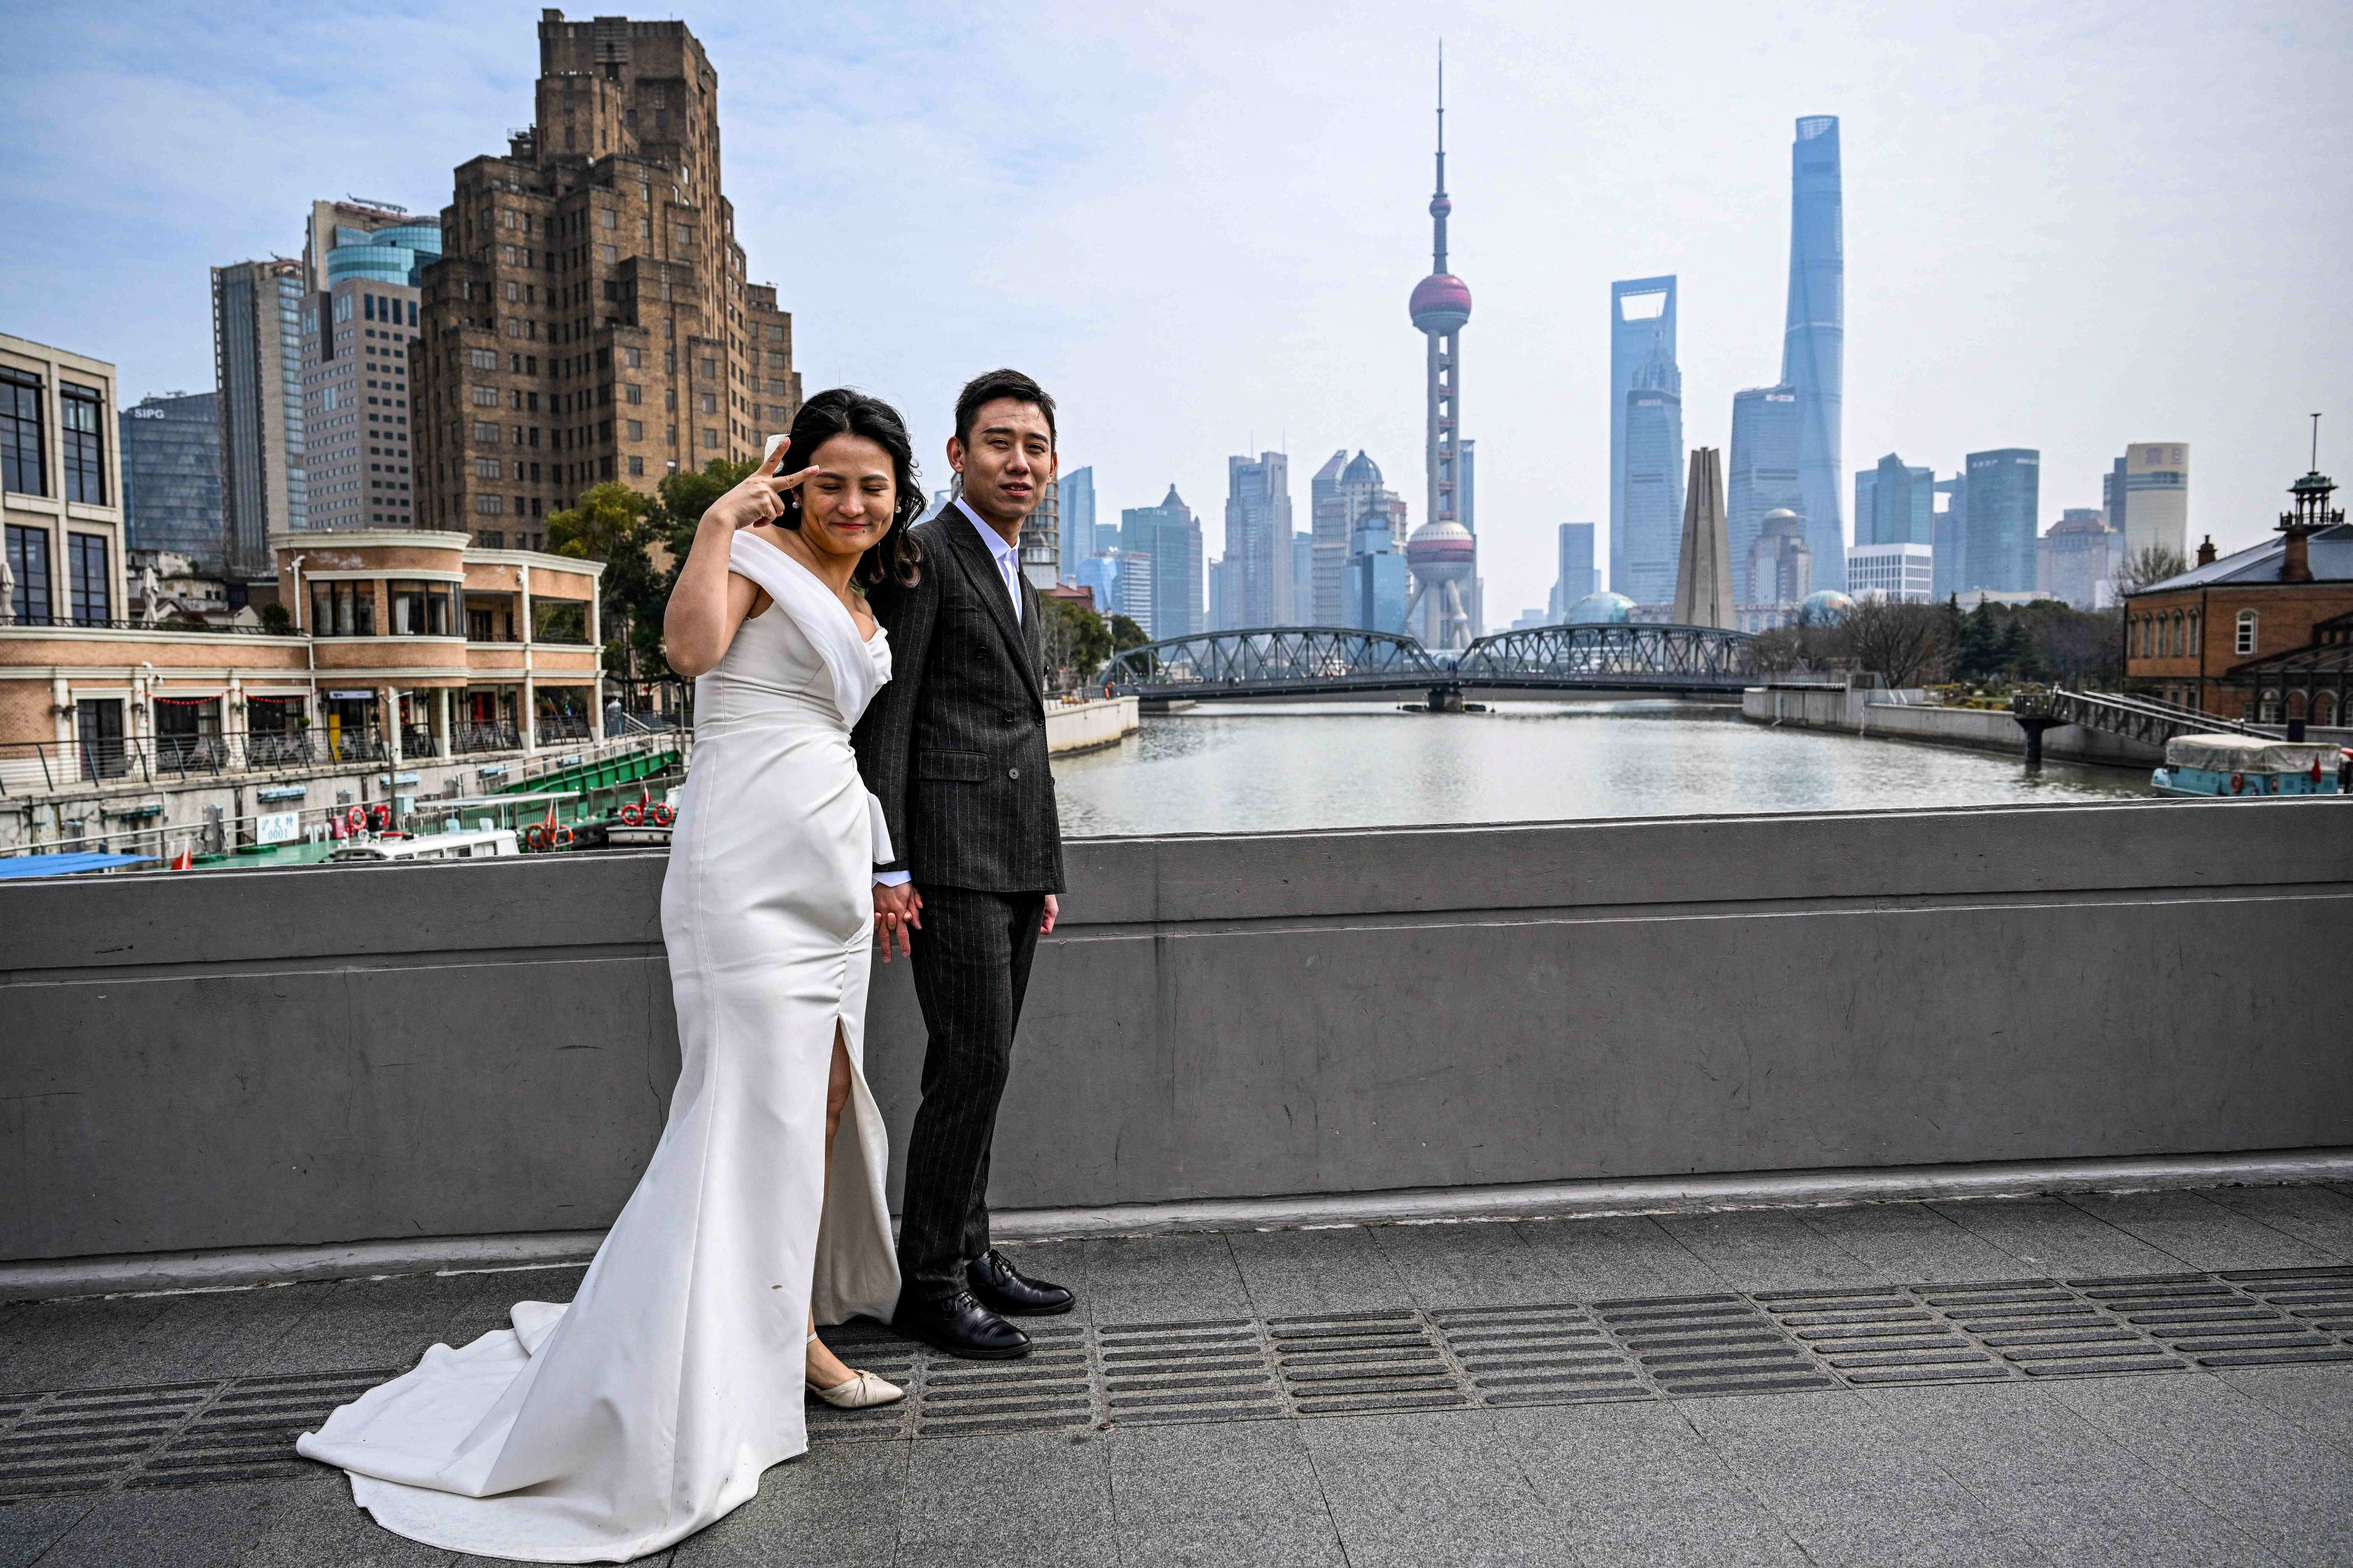 To boost birth rates and encourage marriage, Chinese authorities have offered incentives to encourage couples to have bigger families. Photo: AFP